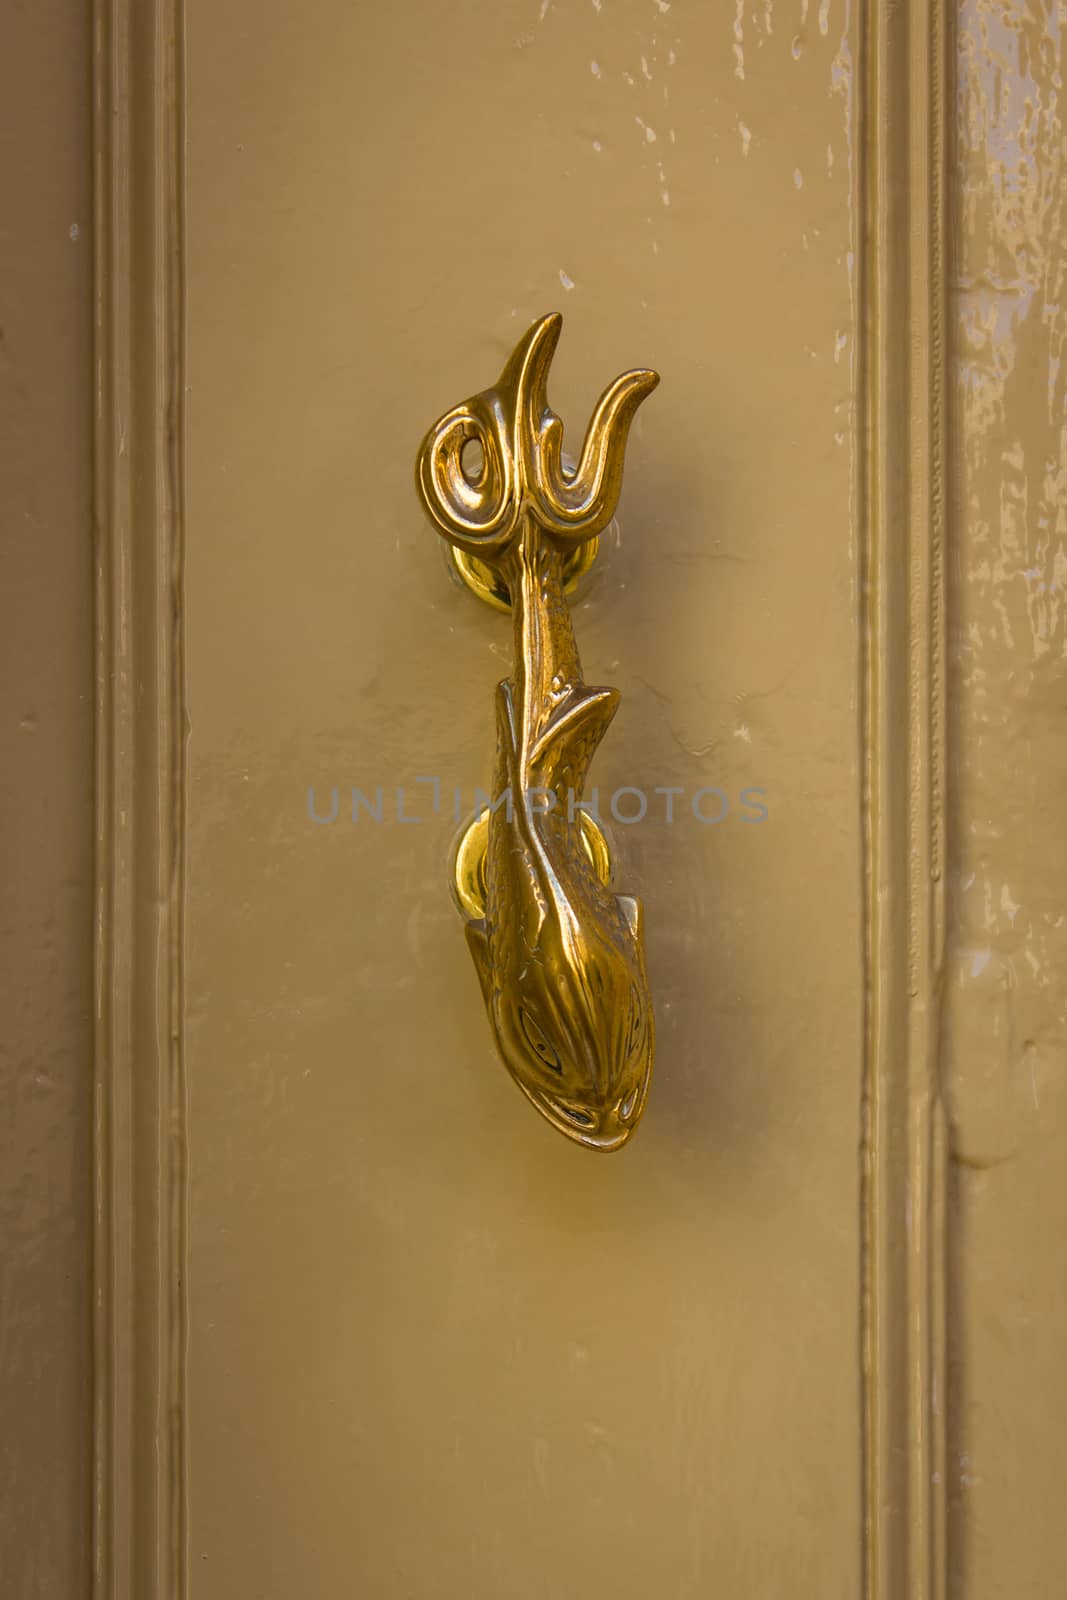 Knocker front door of the house Maltese by goghy73